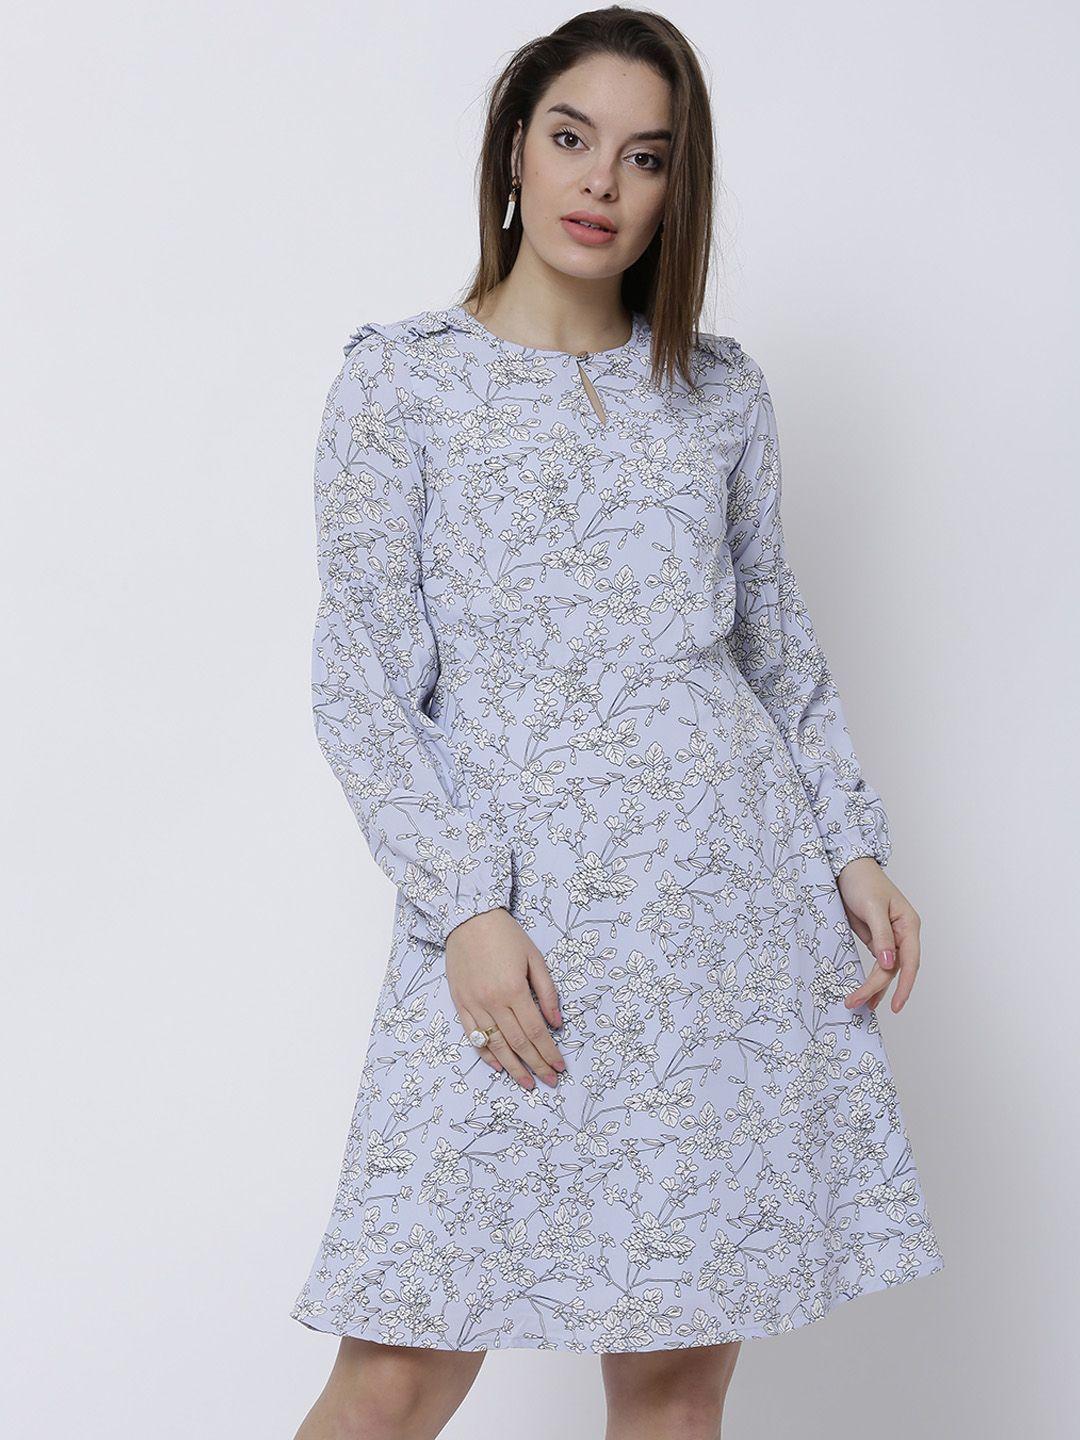 tokyo talkies women blue printed fit and flare dress